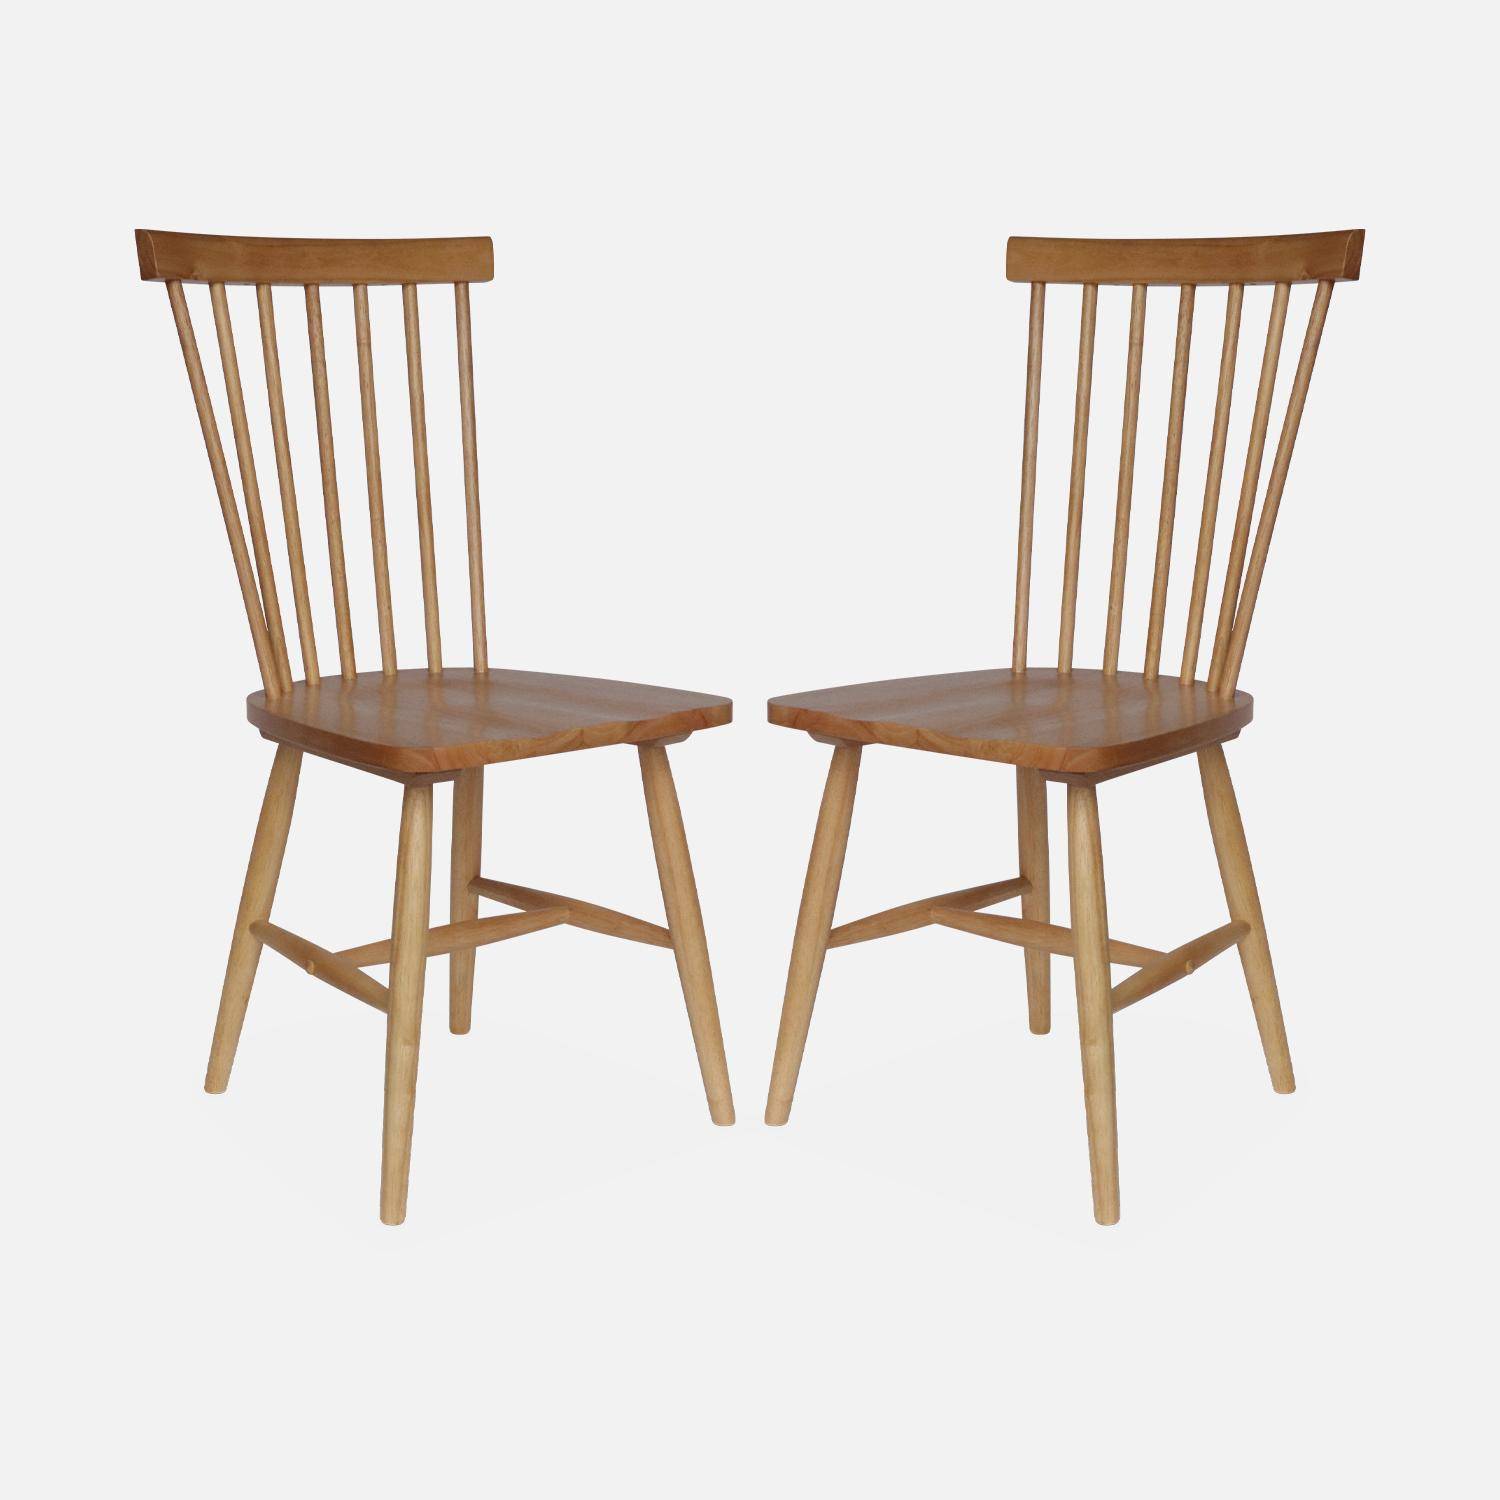 Pair of dining room chairs in Hevea wood,  L49 x W44 x H90 cm, Natural Photo4